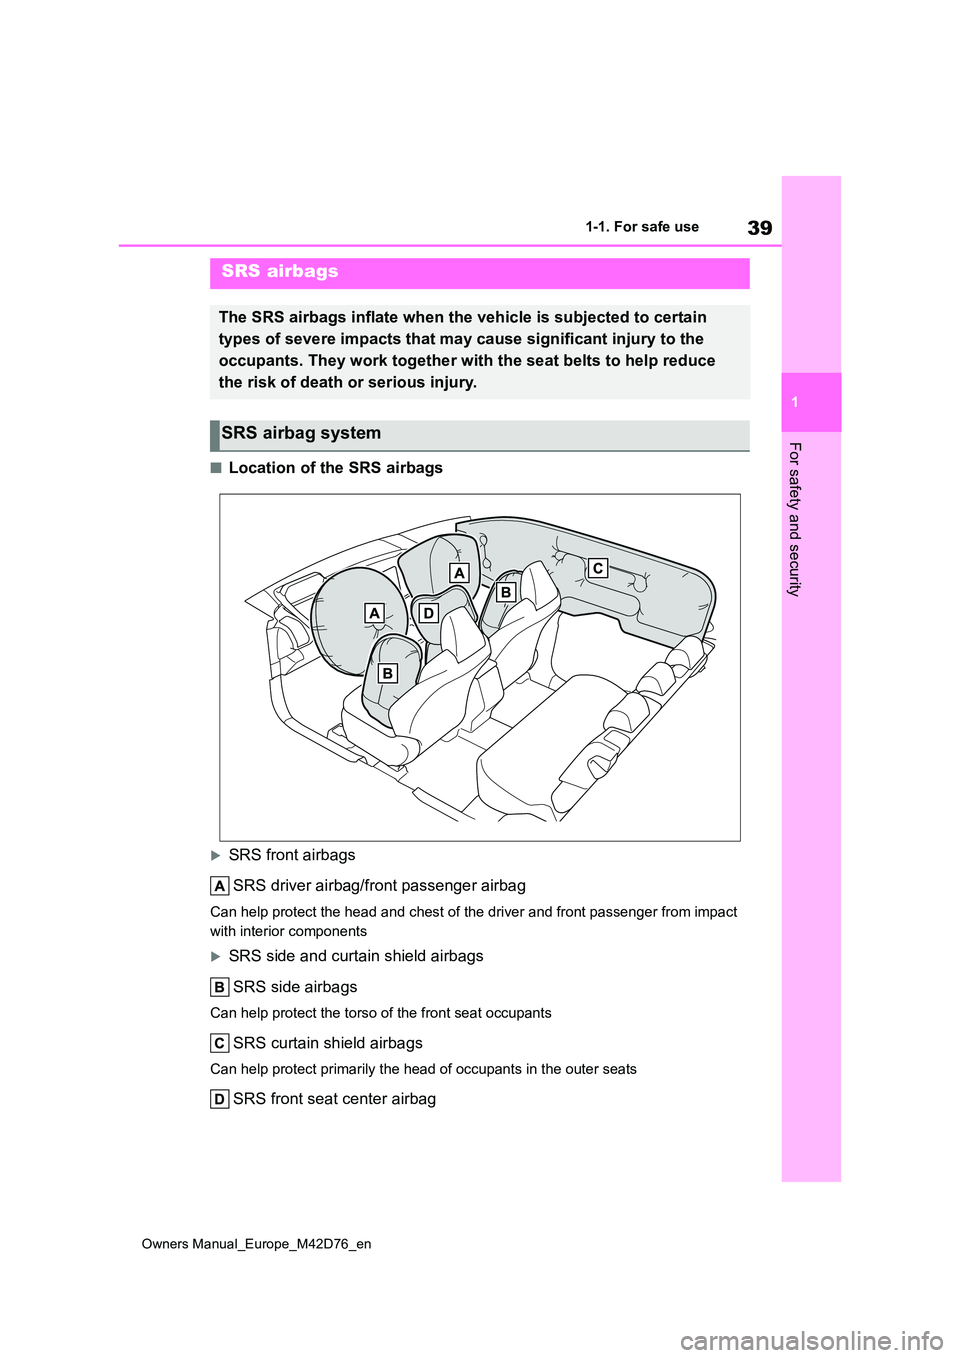 TOYOTA BZ4X 2022  Owners Manual (in English) 39
1
Owners Manual_Europe_M42D76_en
1-1. For safe use
For safety and security
■Location of the SRS airbags
SRS front airbags 
SRS driver airbag/front passenger airbag
Can help protect the head an